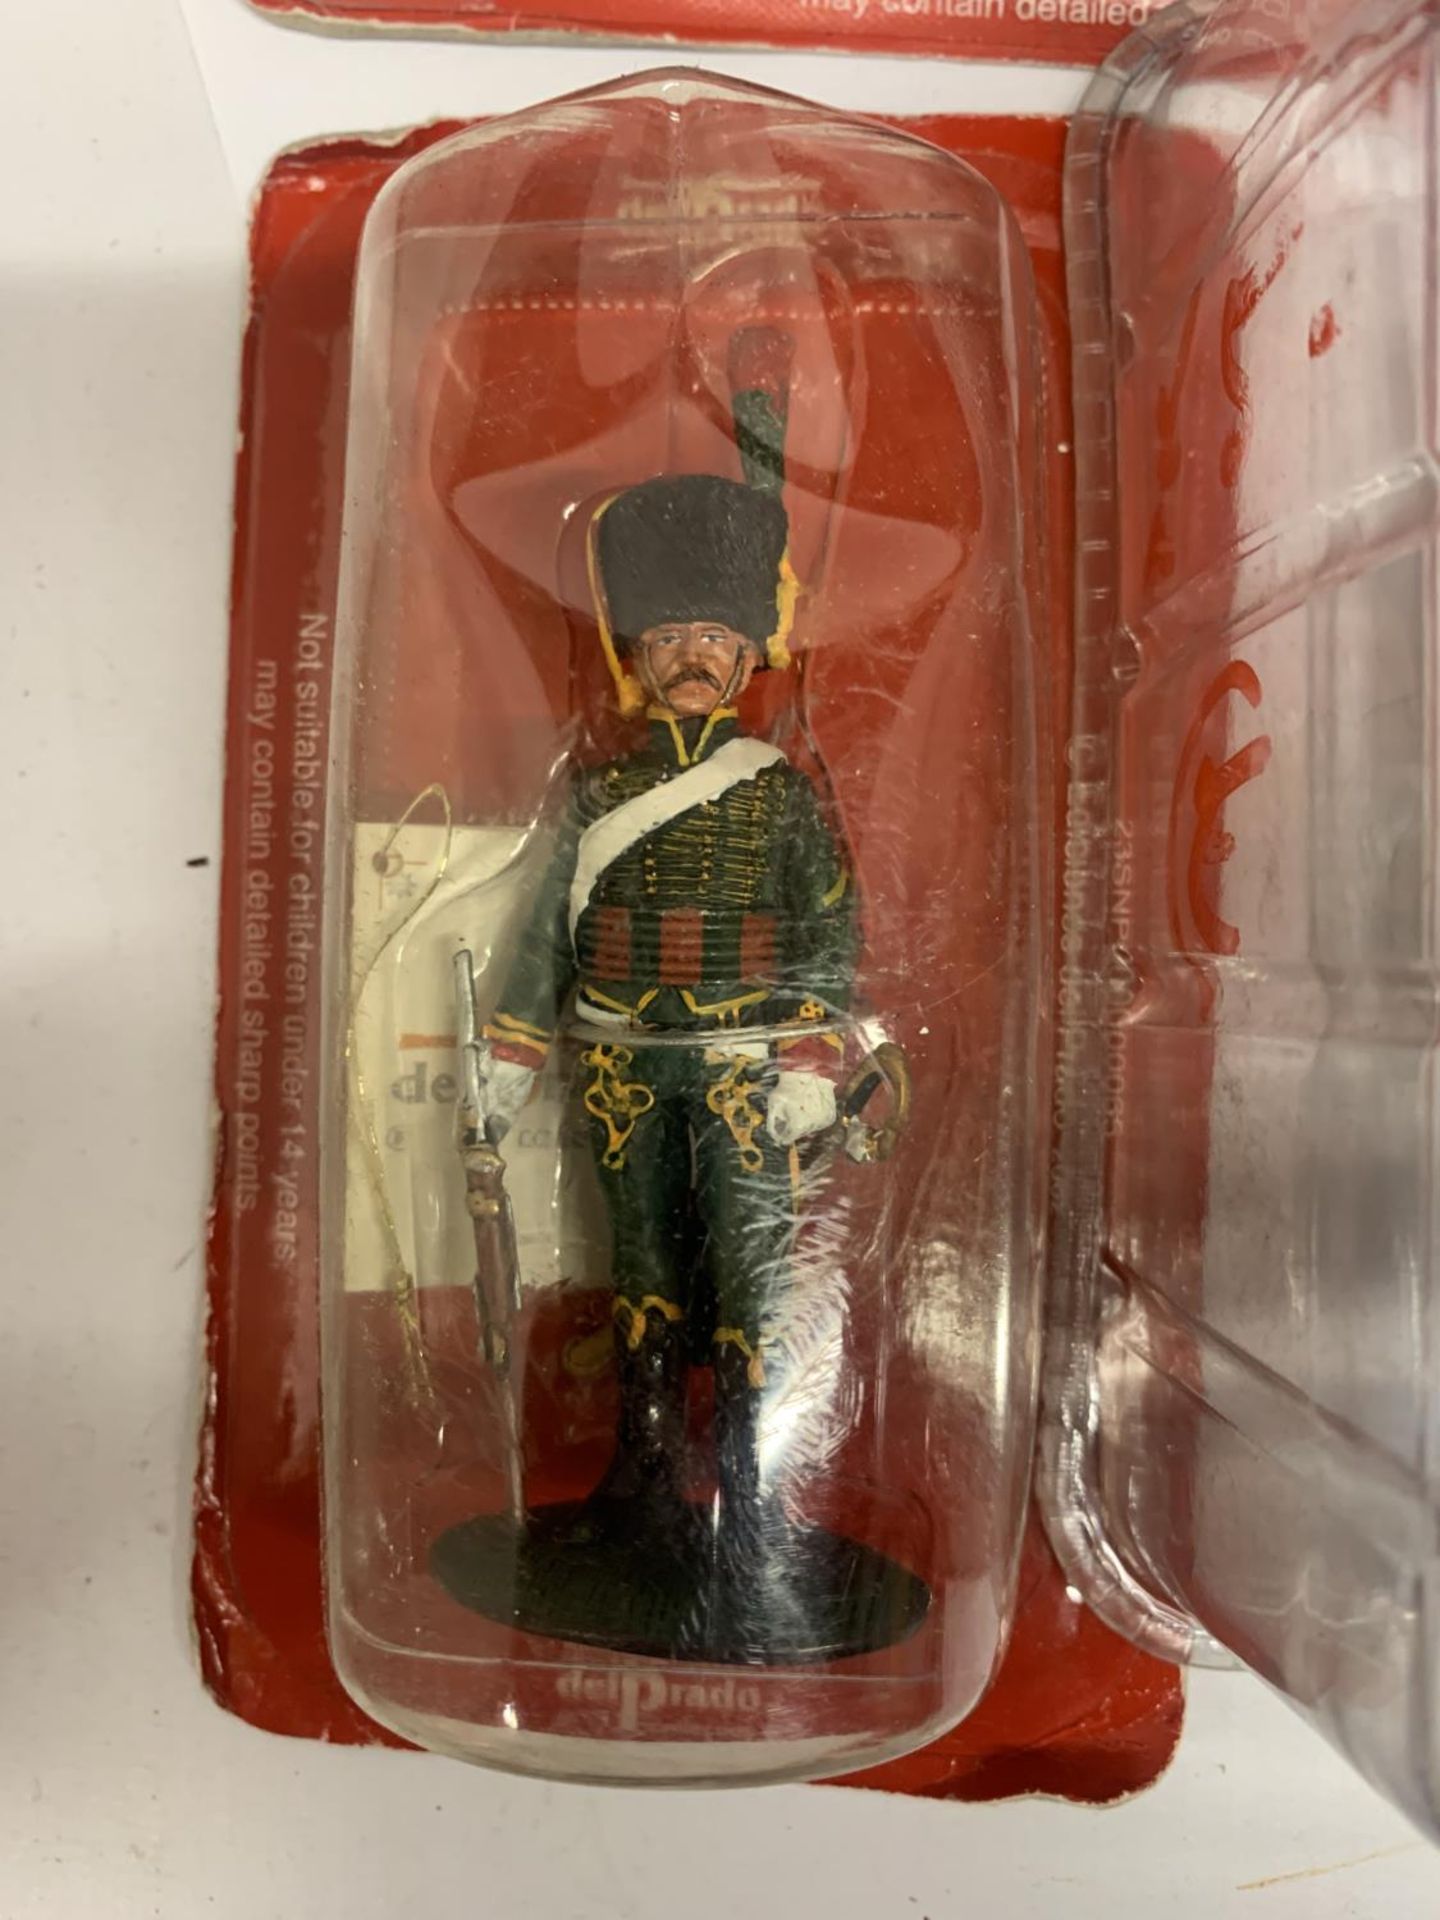 A LARGE COLLECTION OF DEL PRADO MILITARY FIGURES IN BLISTER PACKS - Image 8 of 8